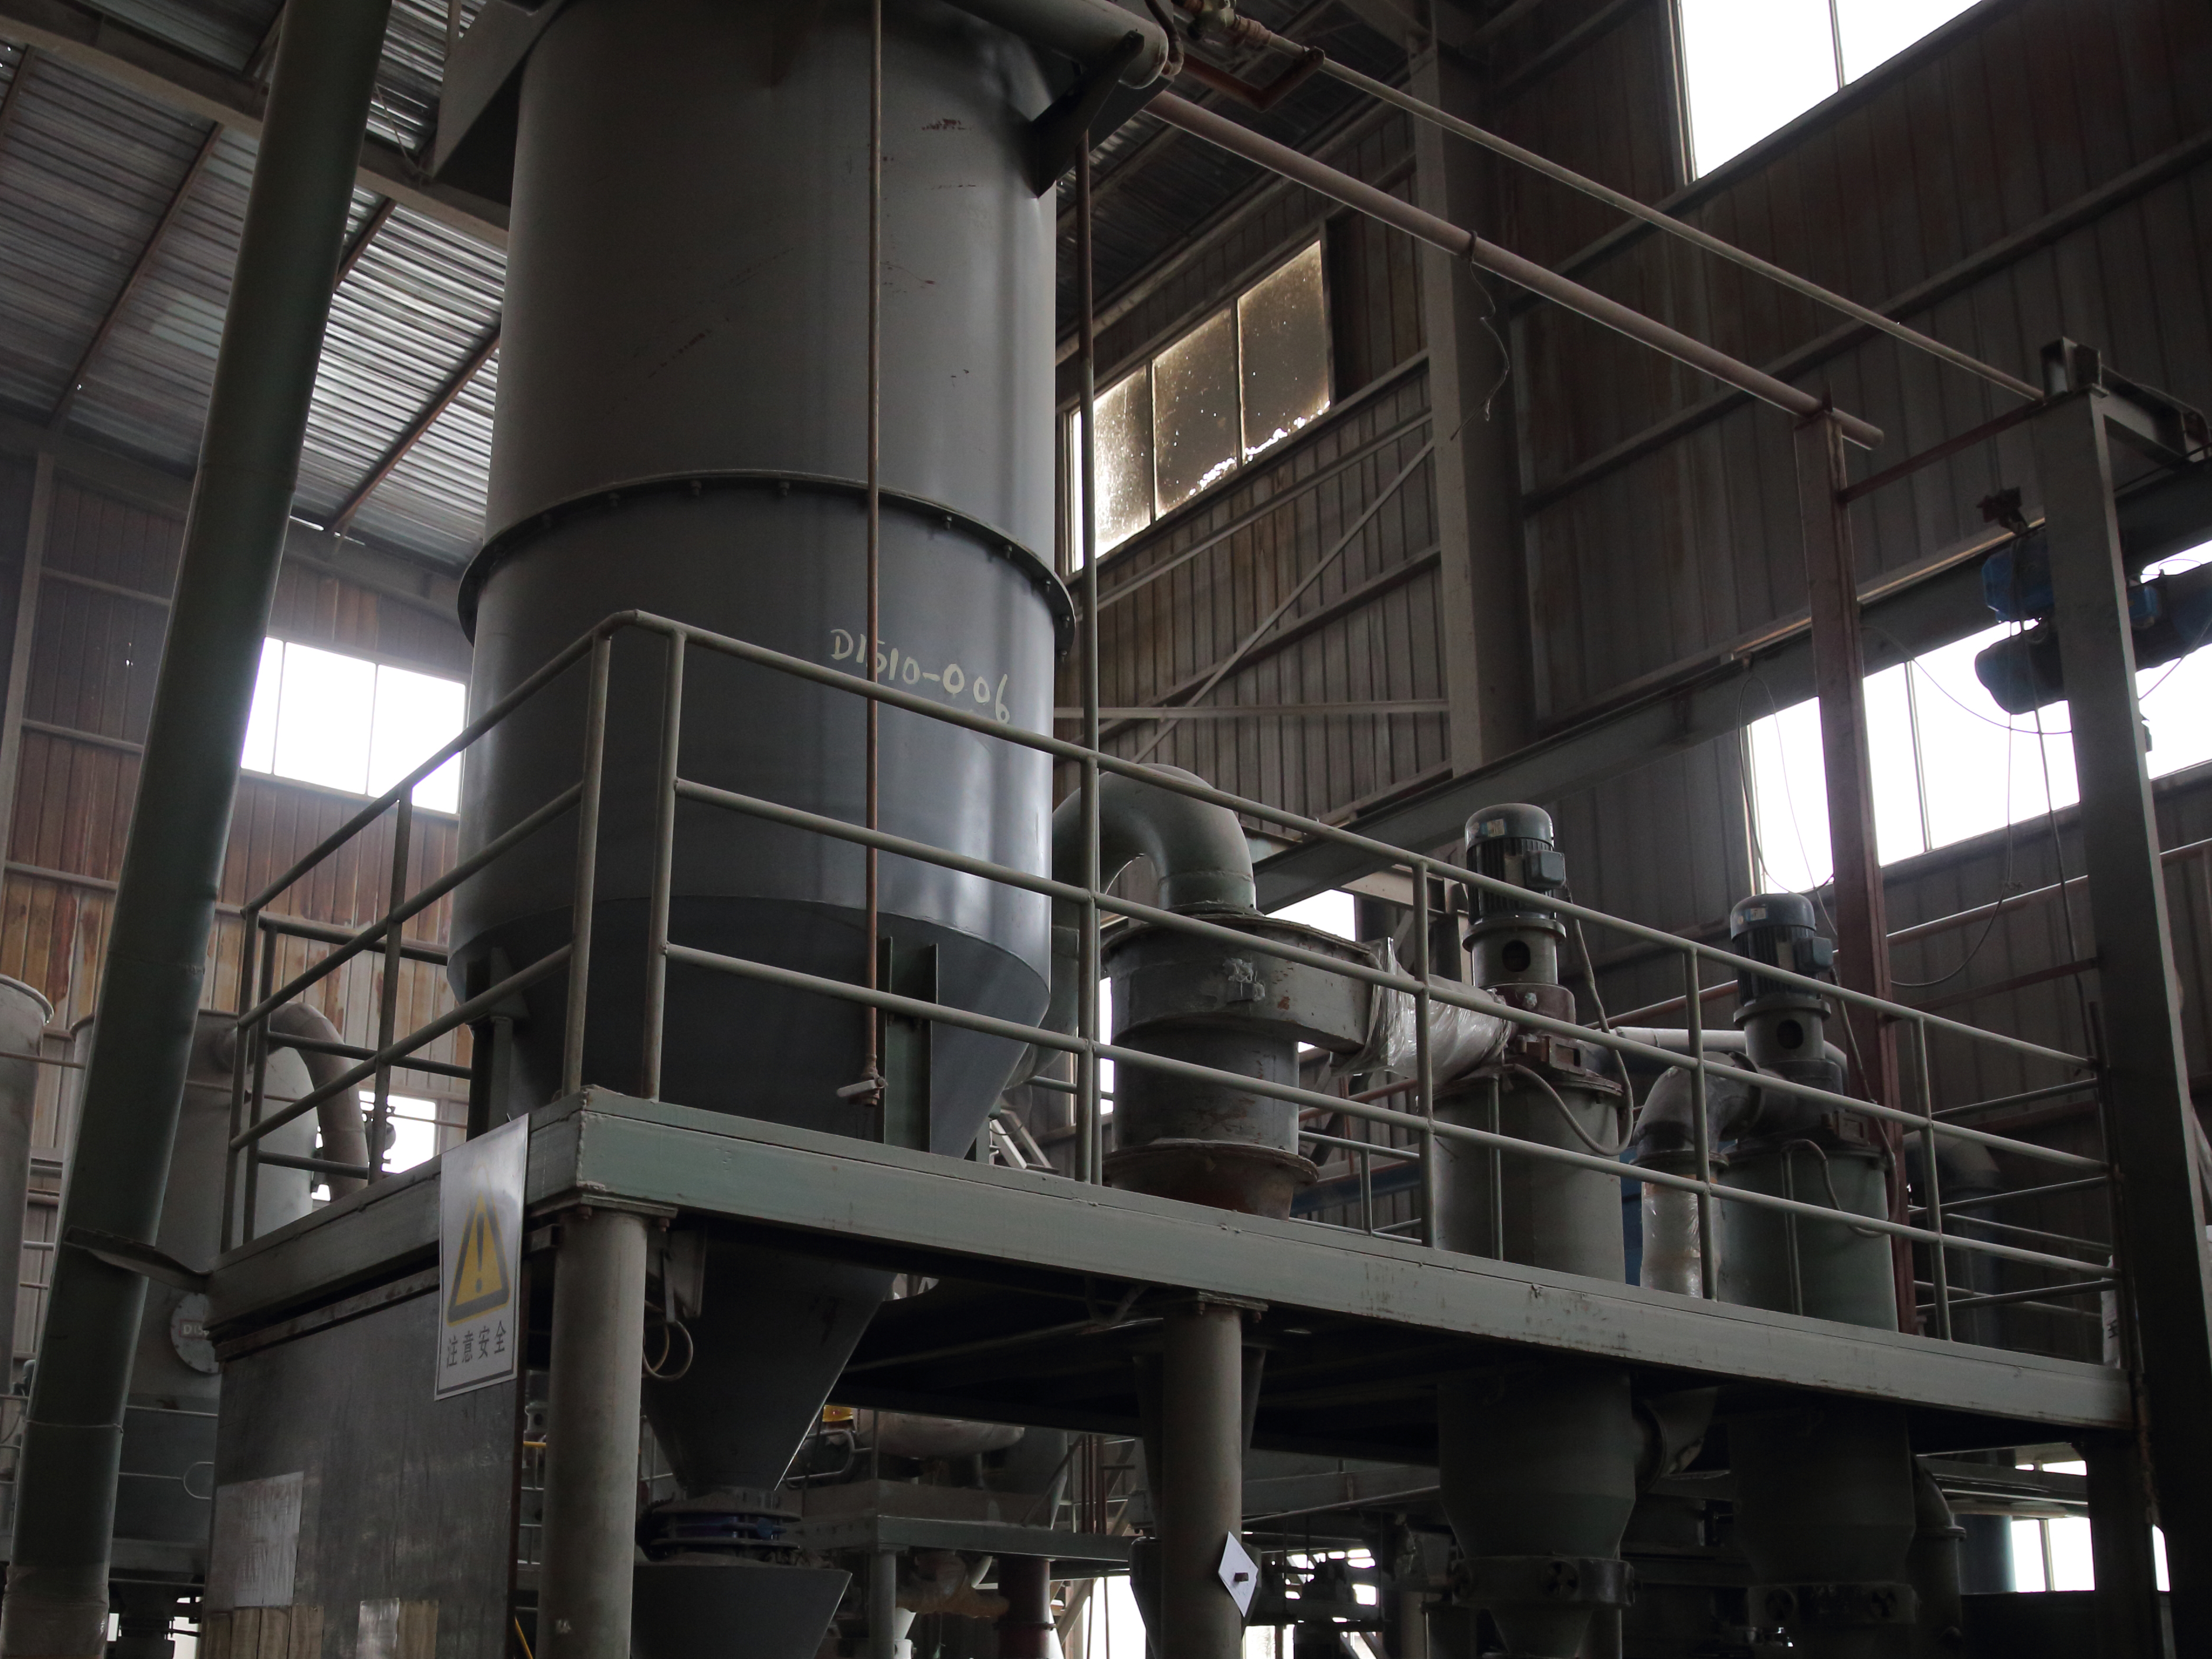 Air mill system at Suzhou plant to produce micro grits up to P1200